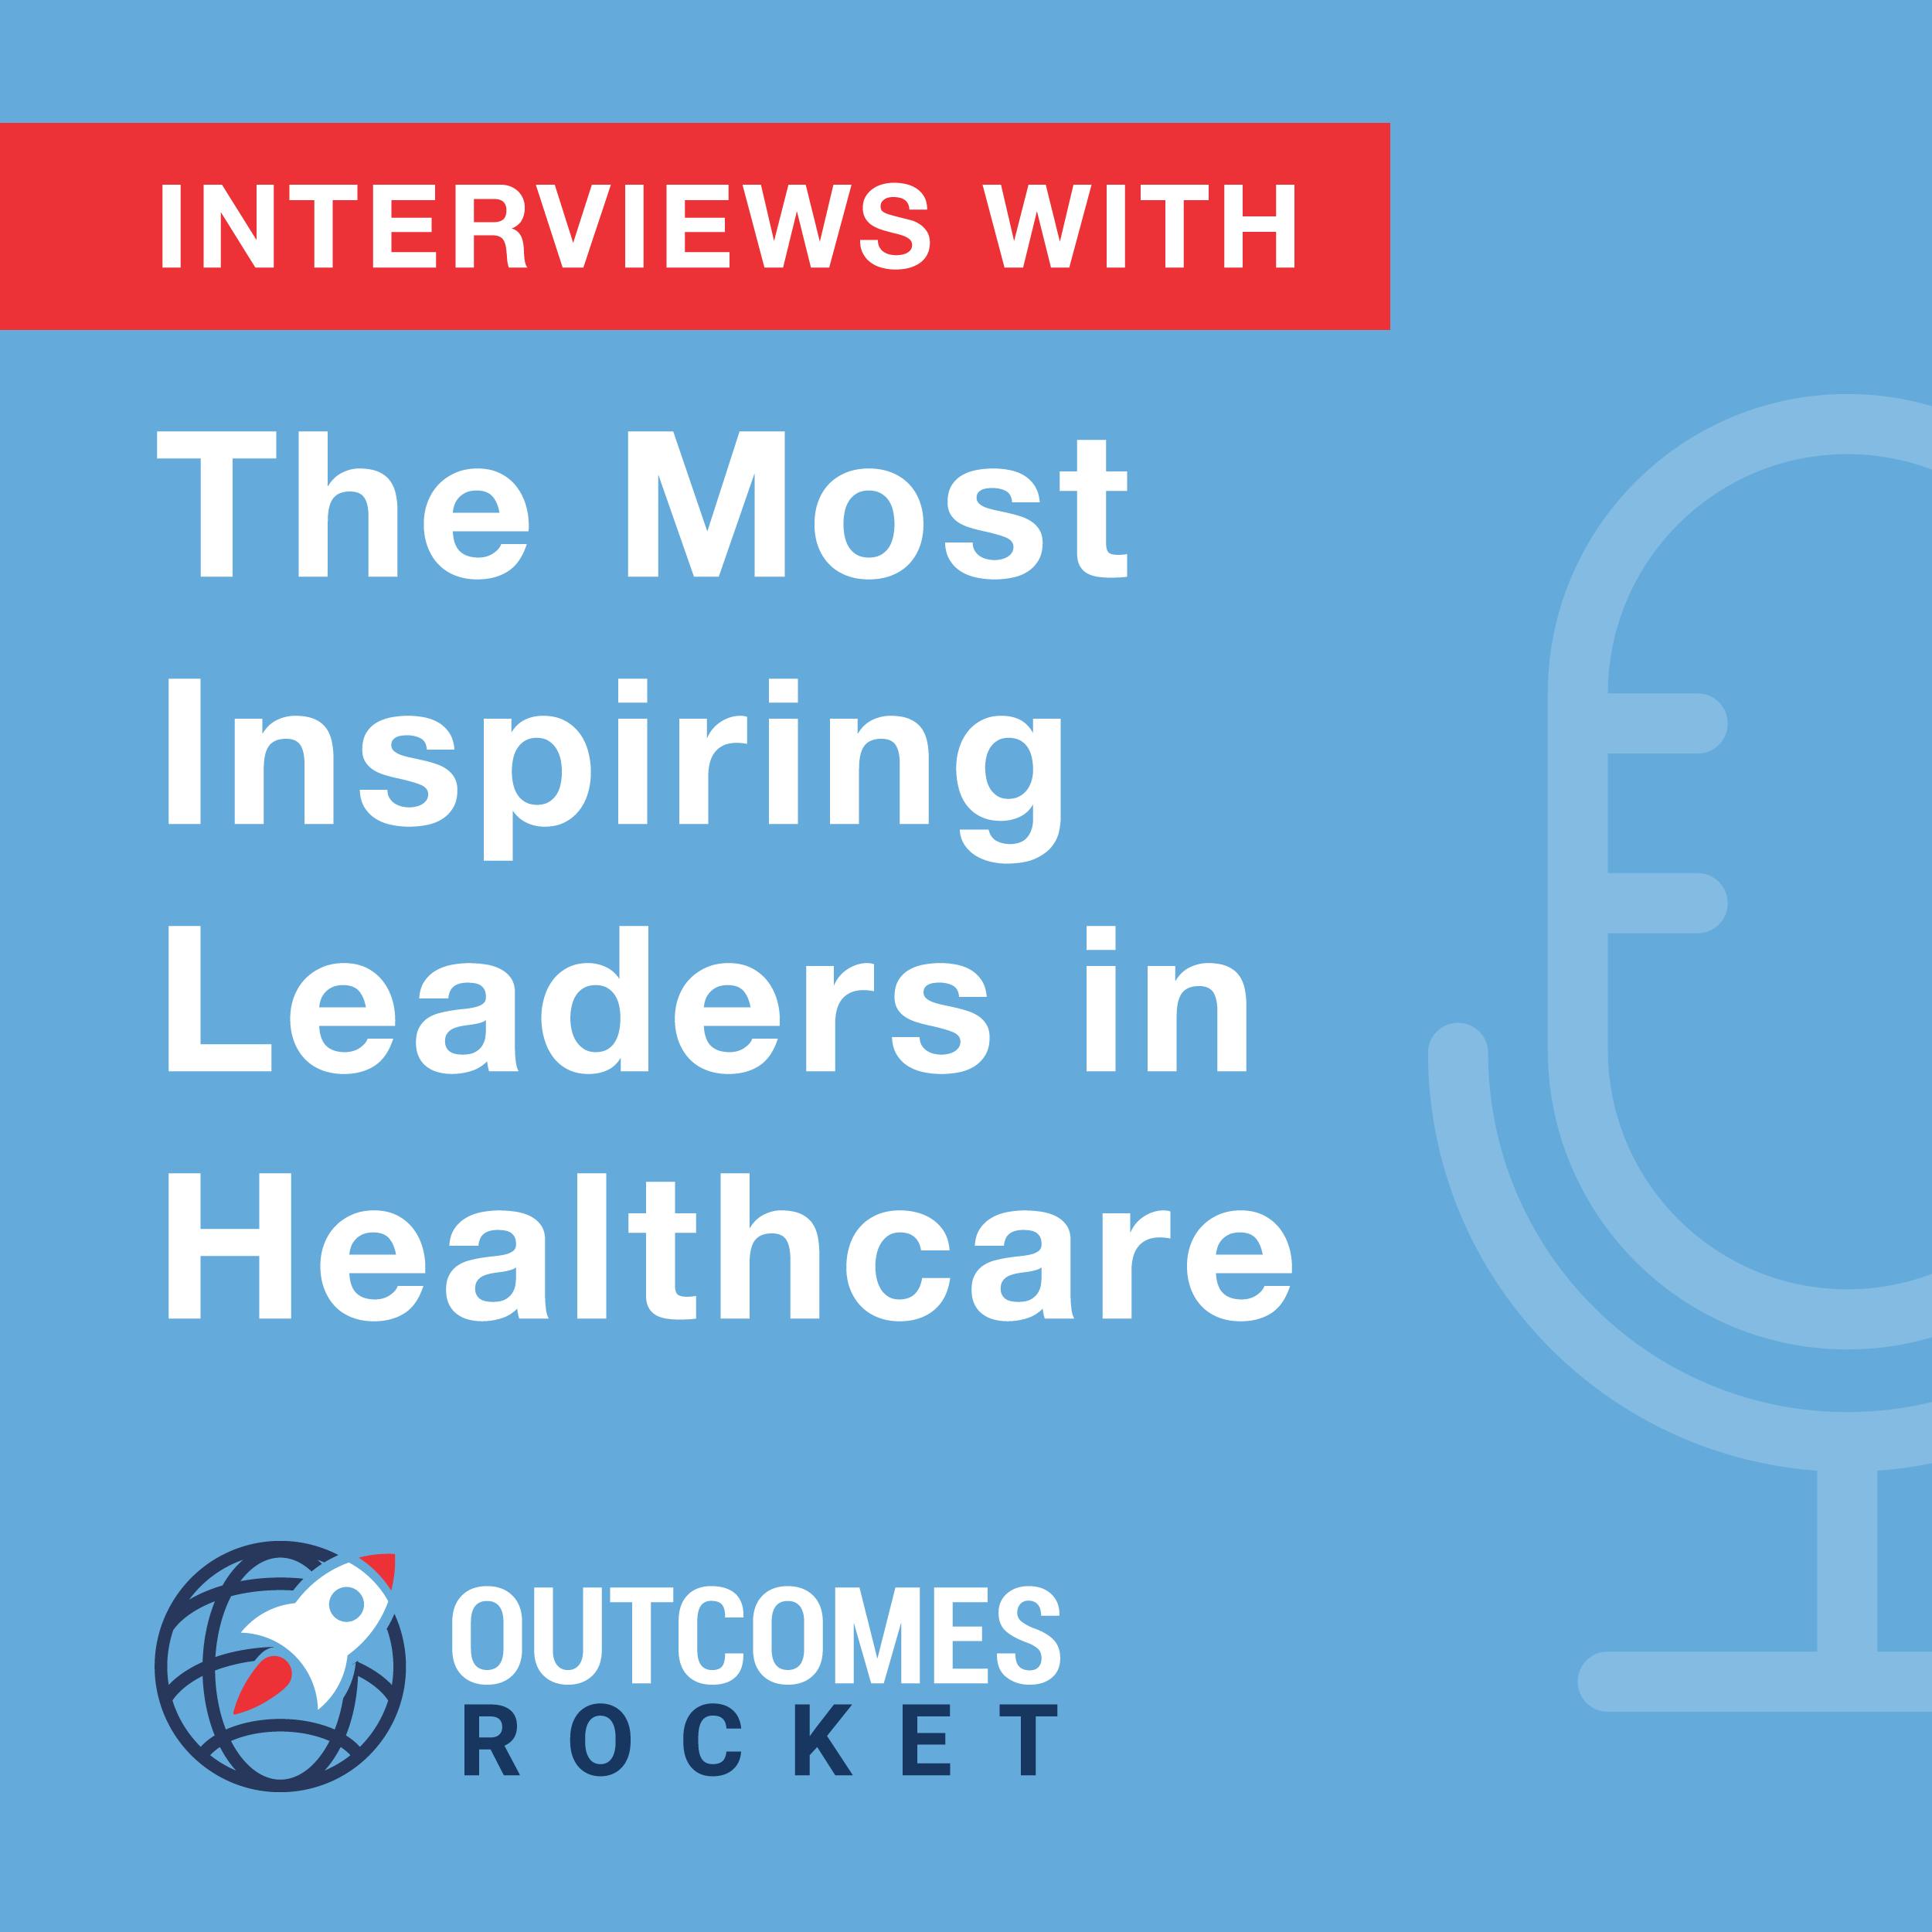 Understanding Physician Networks and Patterns of Influence with Greg Matthews, Founder and Principal at HealthQuant